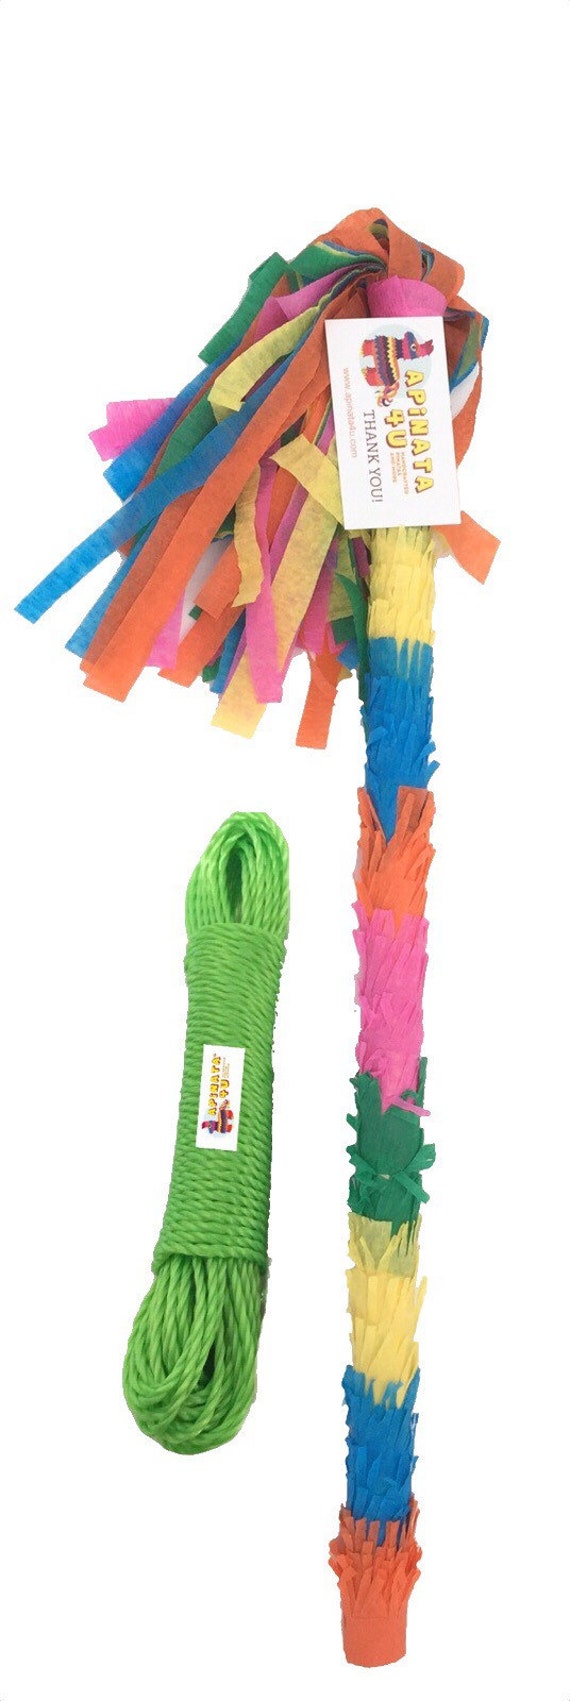 Sale! Ready To Ship! 20” Wooden Party Pinata Stick Pinata Wand Sturdy Hand  Decorated Custom Colors Available! Free 30 Feet Rope Included